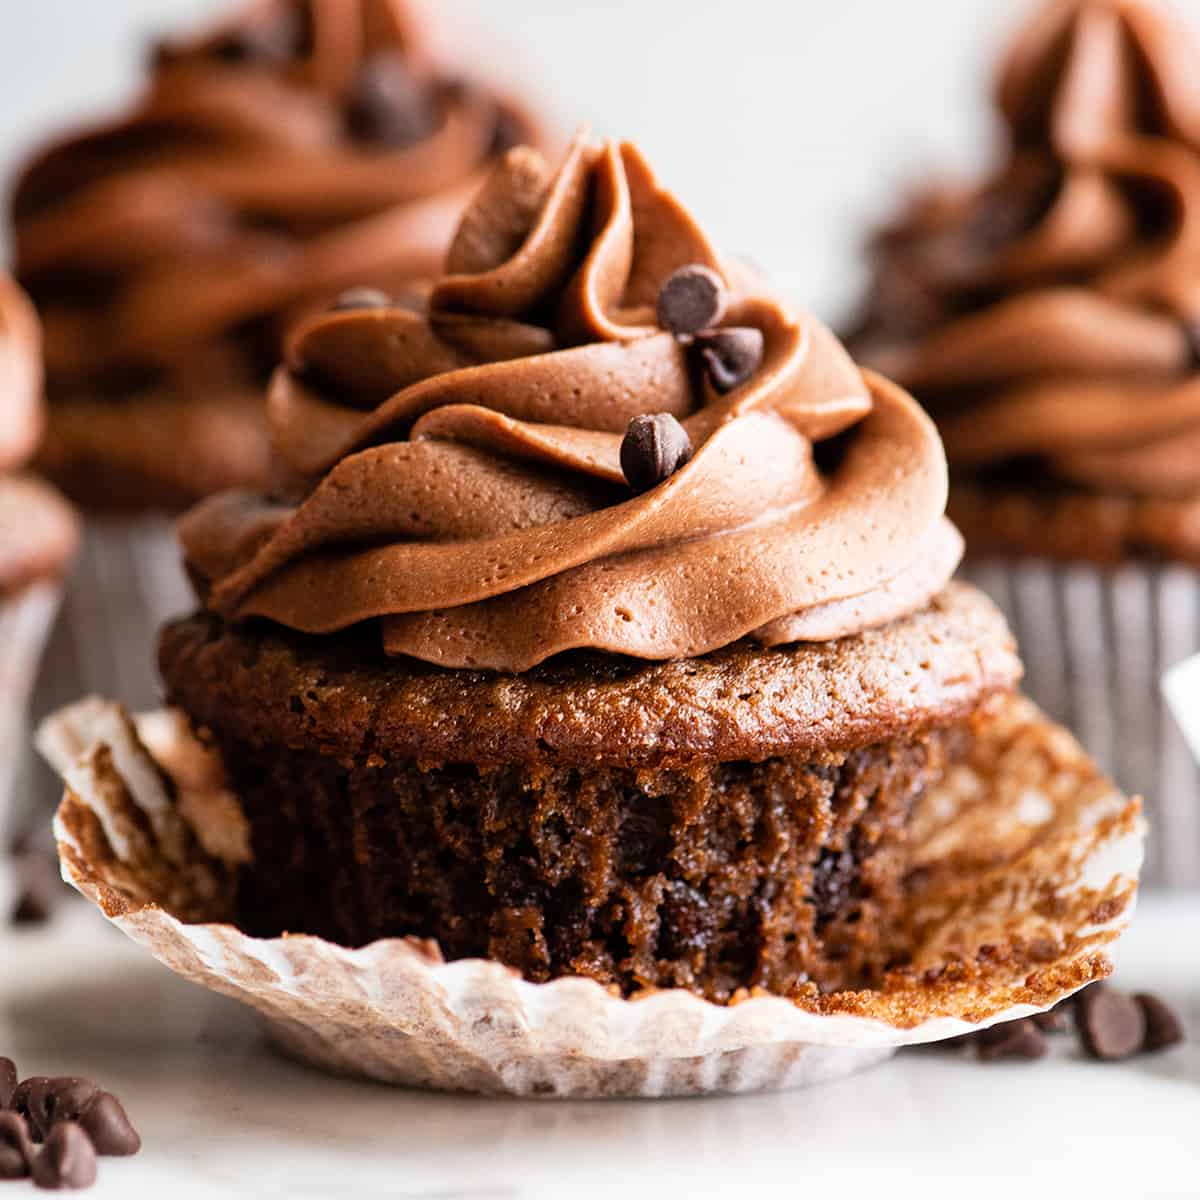 front view of a chocolate cupcake with chocolate frosting with the wrapper unwrapped